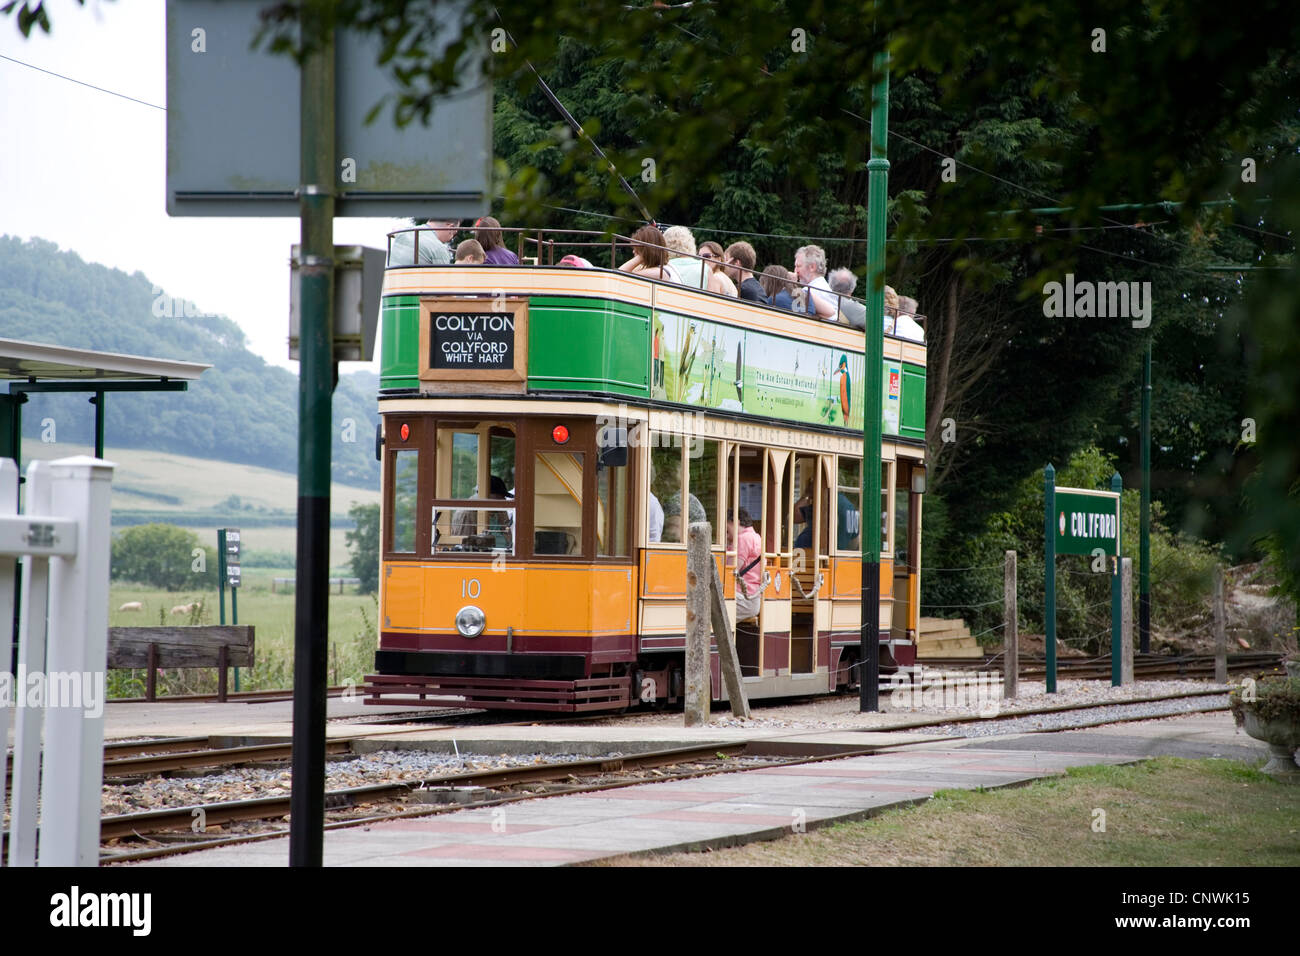 Tram between Colyton and Colyford, East Devon Stock Photo